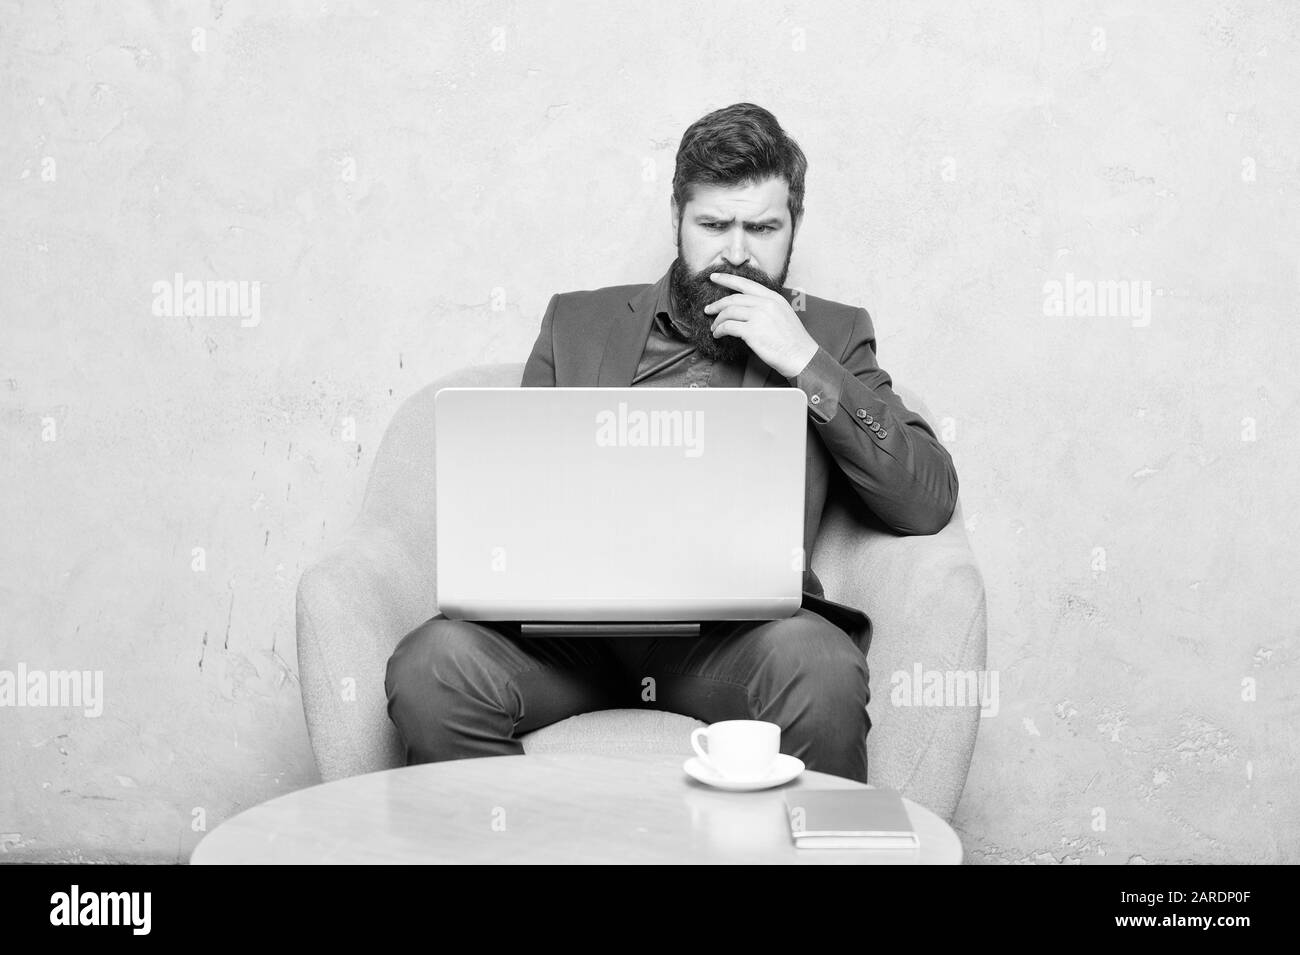 Blogging is a must for any company. Bearded man blogging on popular social network. Professional journalist blogging and writing articles on workplace. Blogging and advertising. Stock Photo